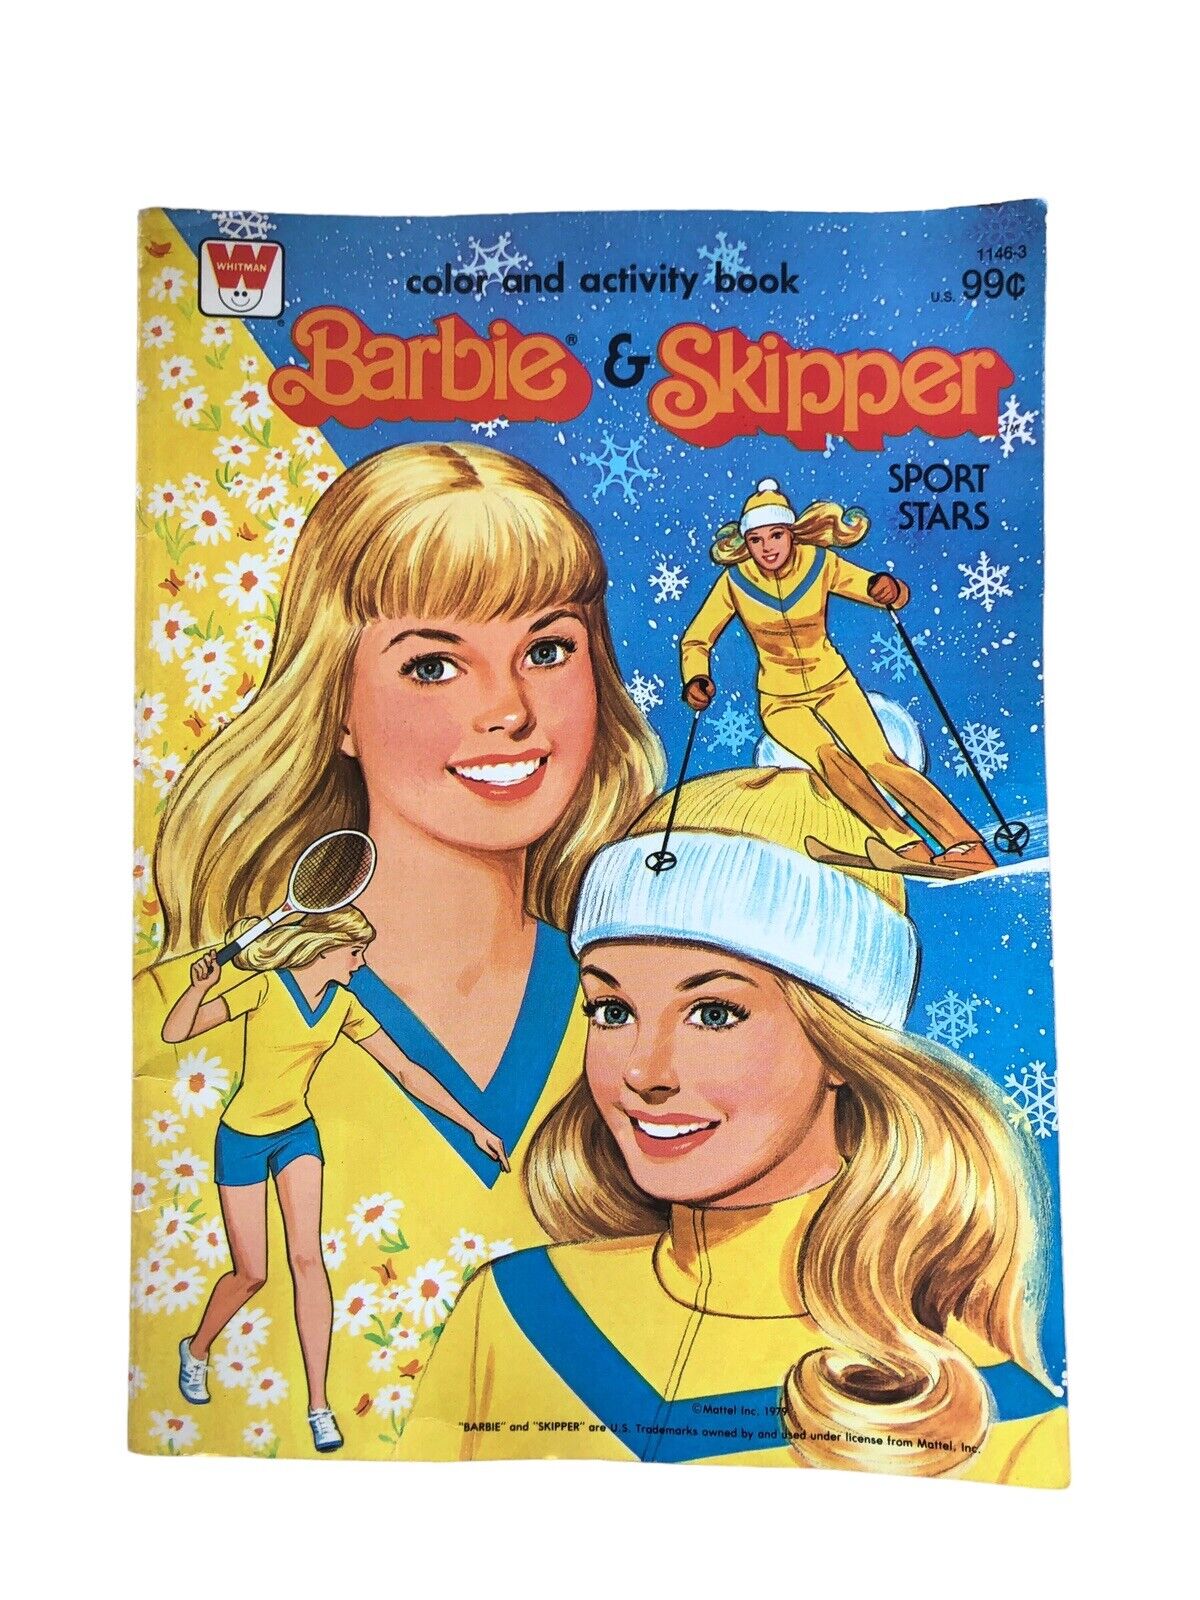 1979 Barbie &Skipper  sports star color and activity bo